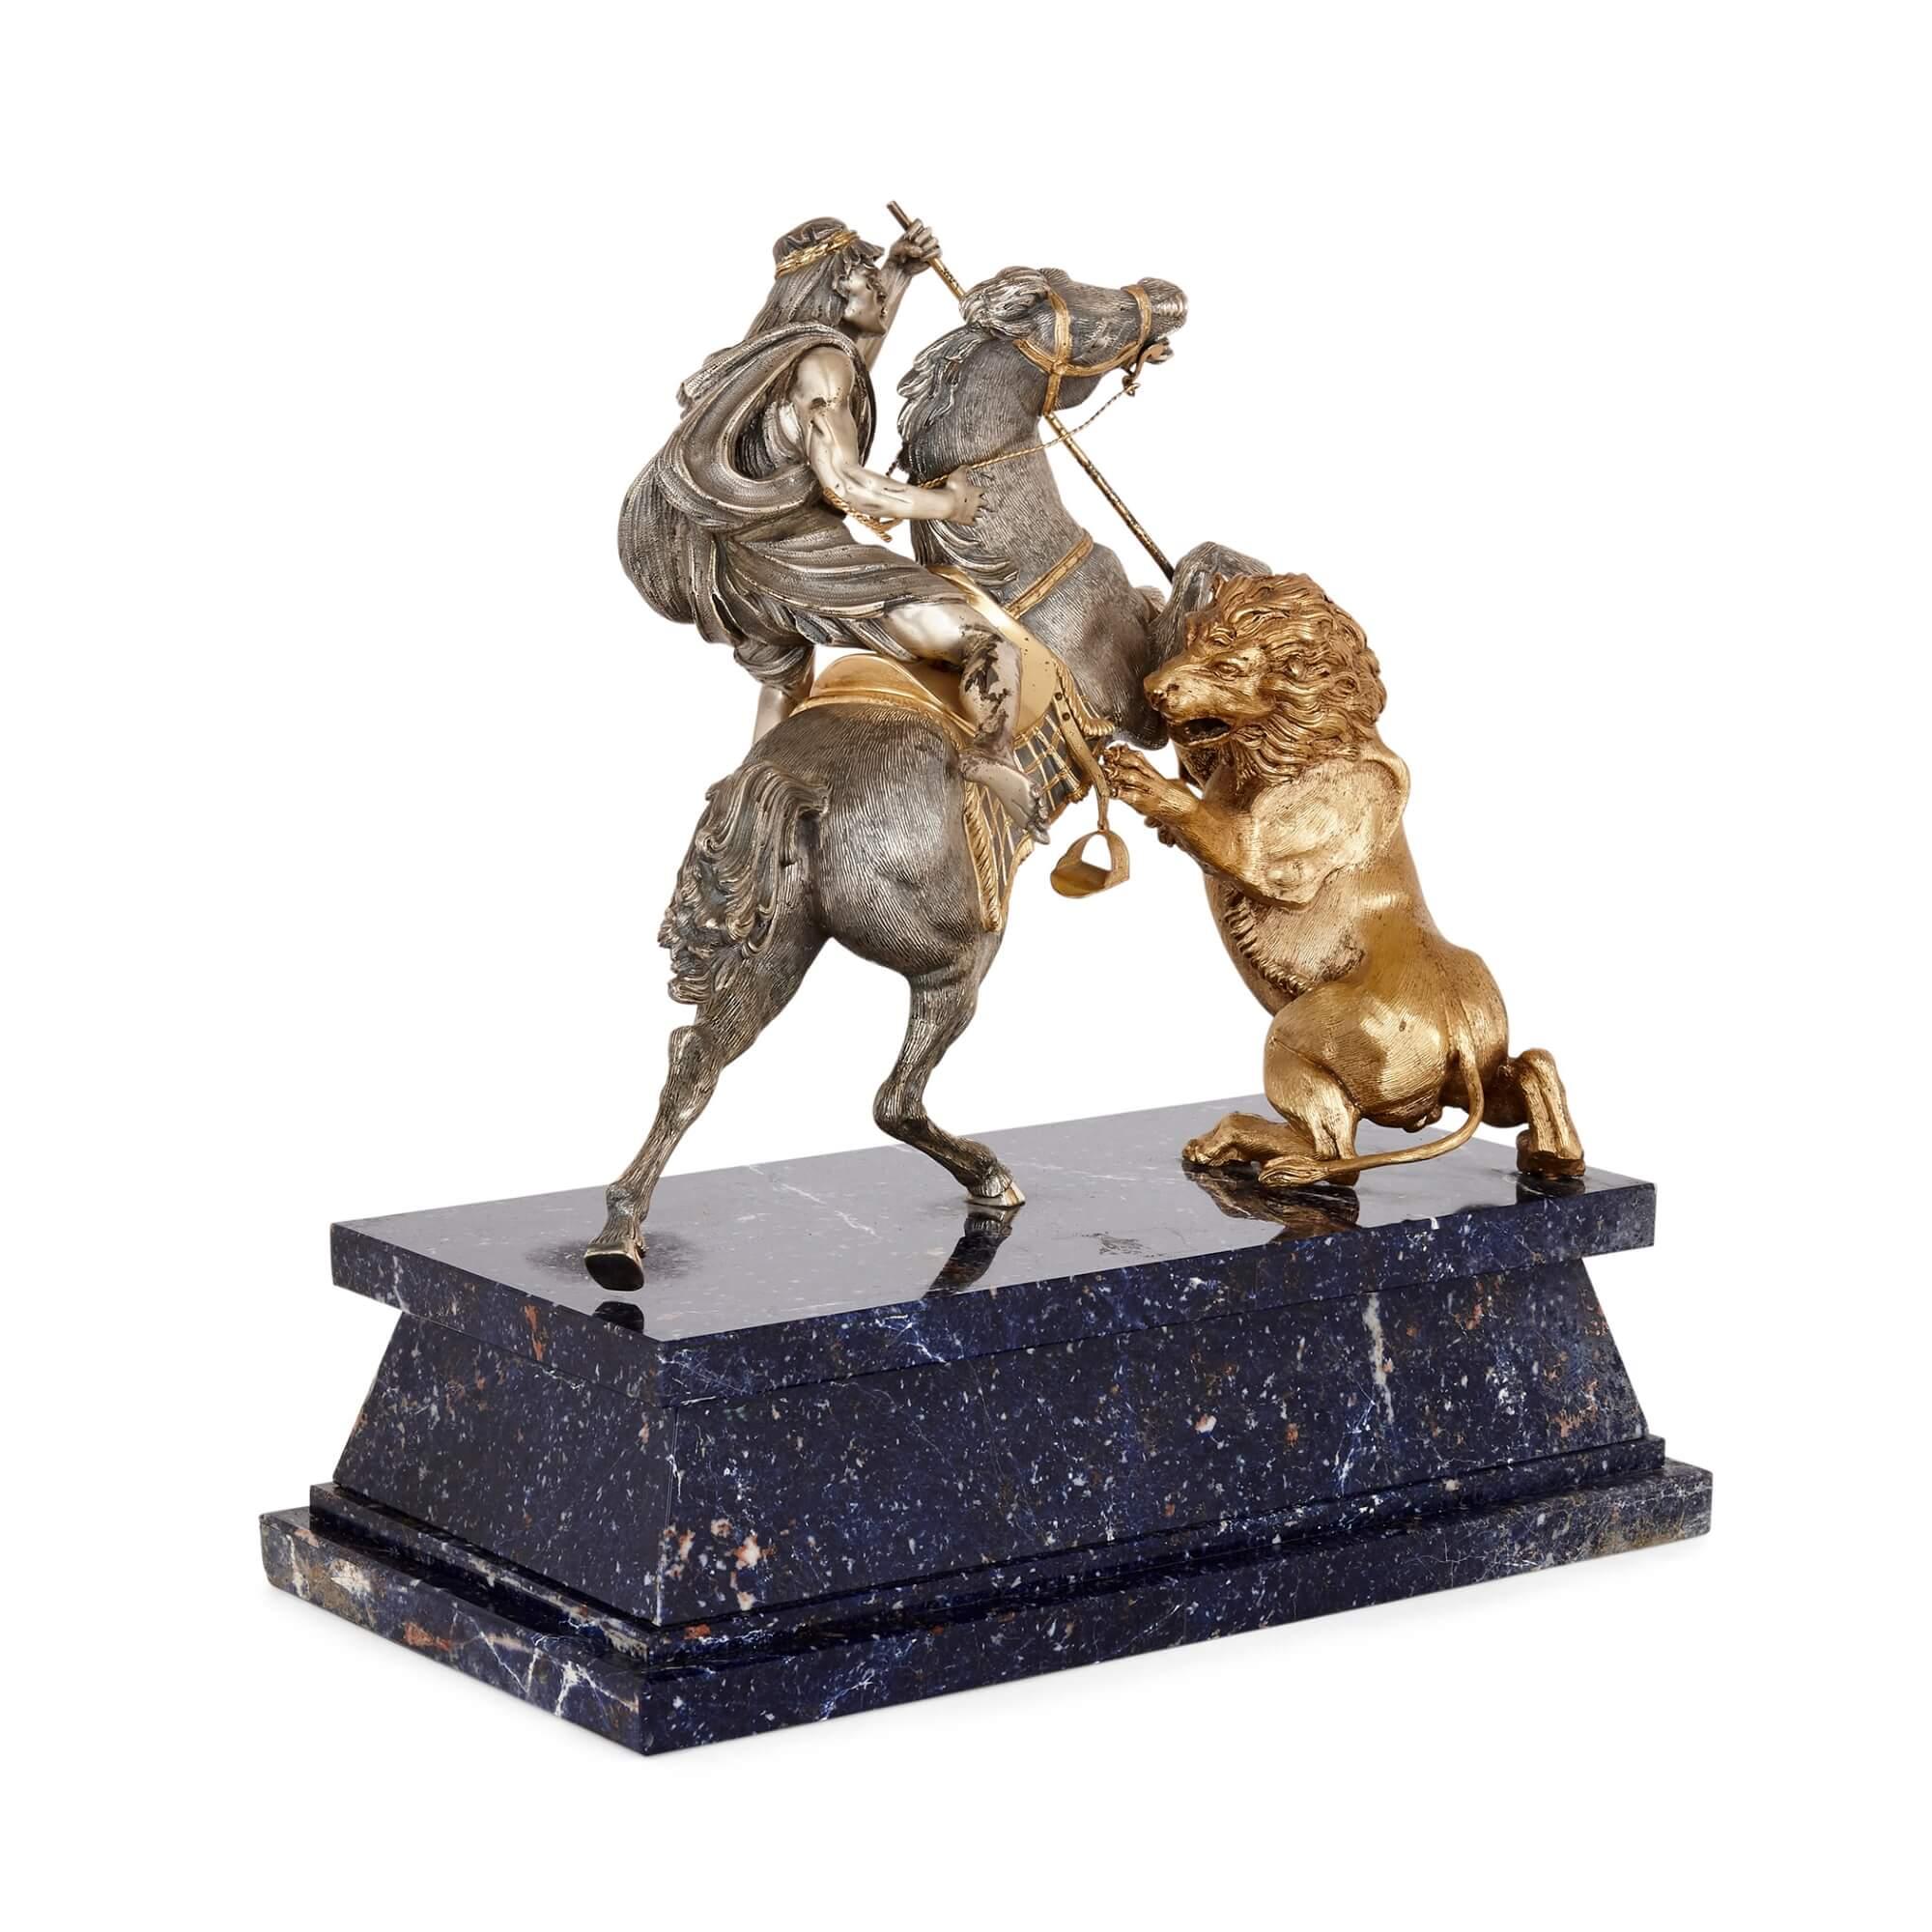 Mid-century silver and silver-gilt animalier sculpture.
Italian, c. 1970s
Dimensions: Height 33cm, width 32cm, depth 17cm

This dynamic silver and silt-gilt sculptural group depicts a naturalistic horse and its rider battling a lion. The lion